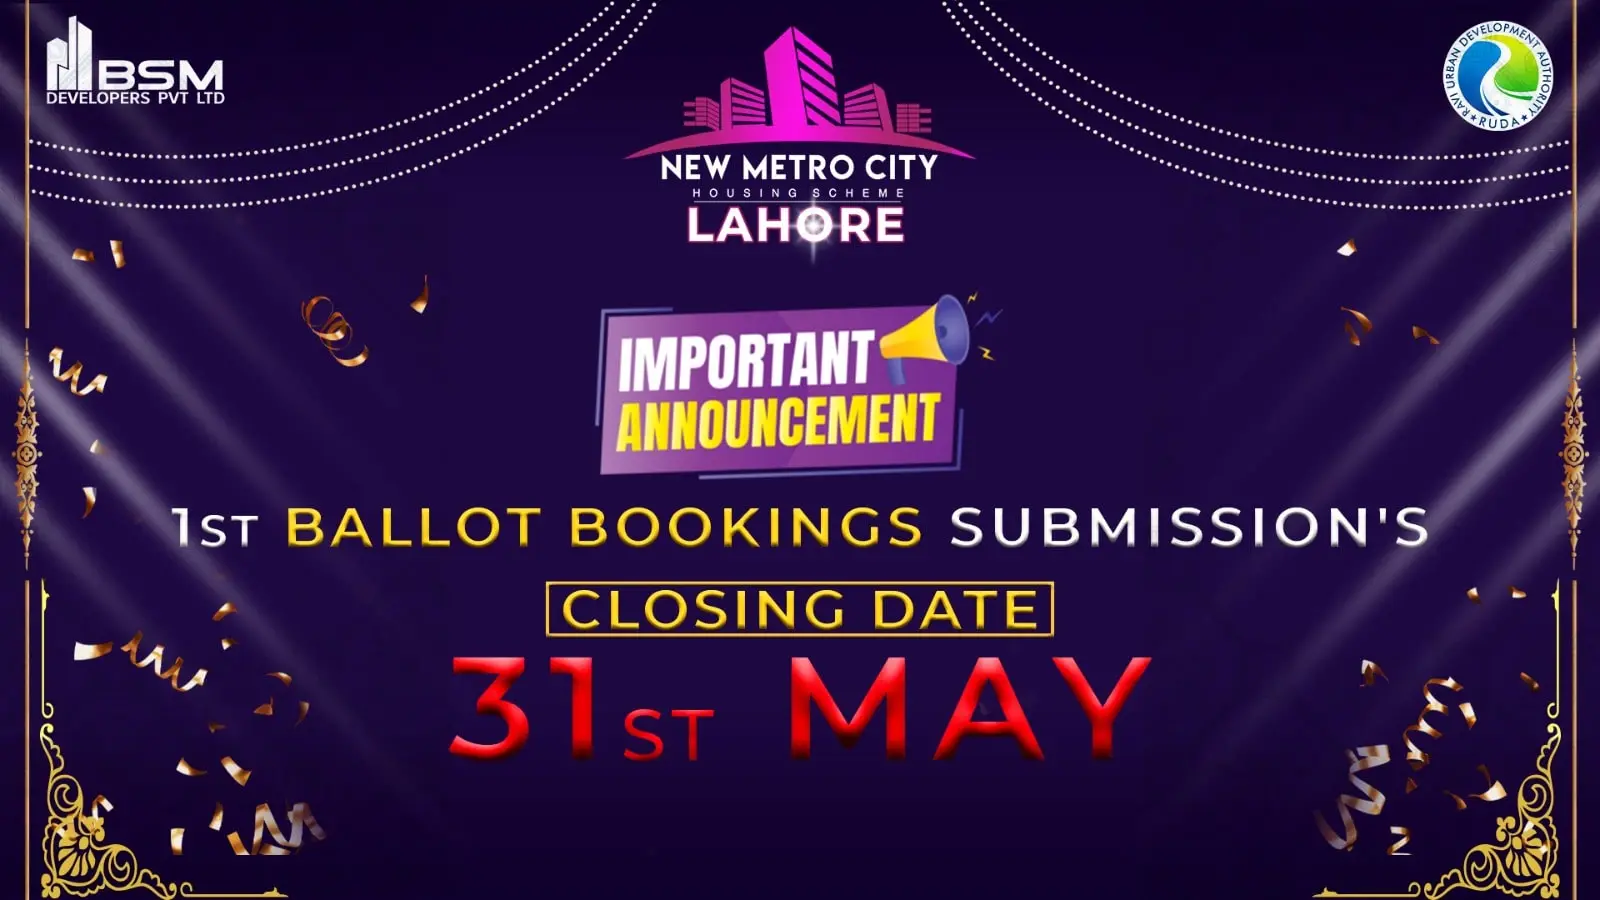 NMC Lahore 1st Ballot Bookings Submission Closing Date 31st May